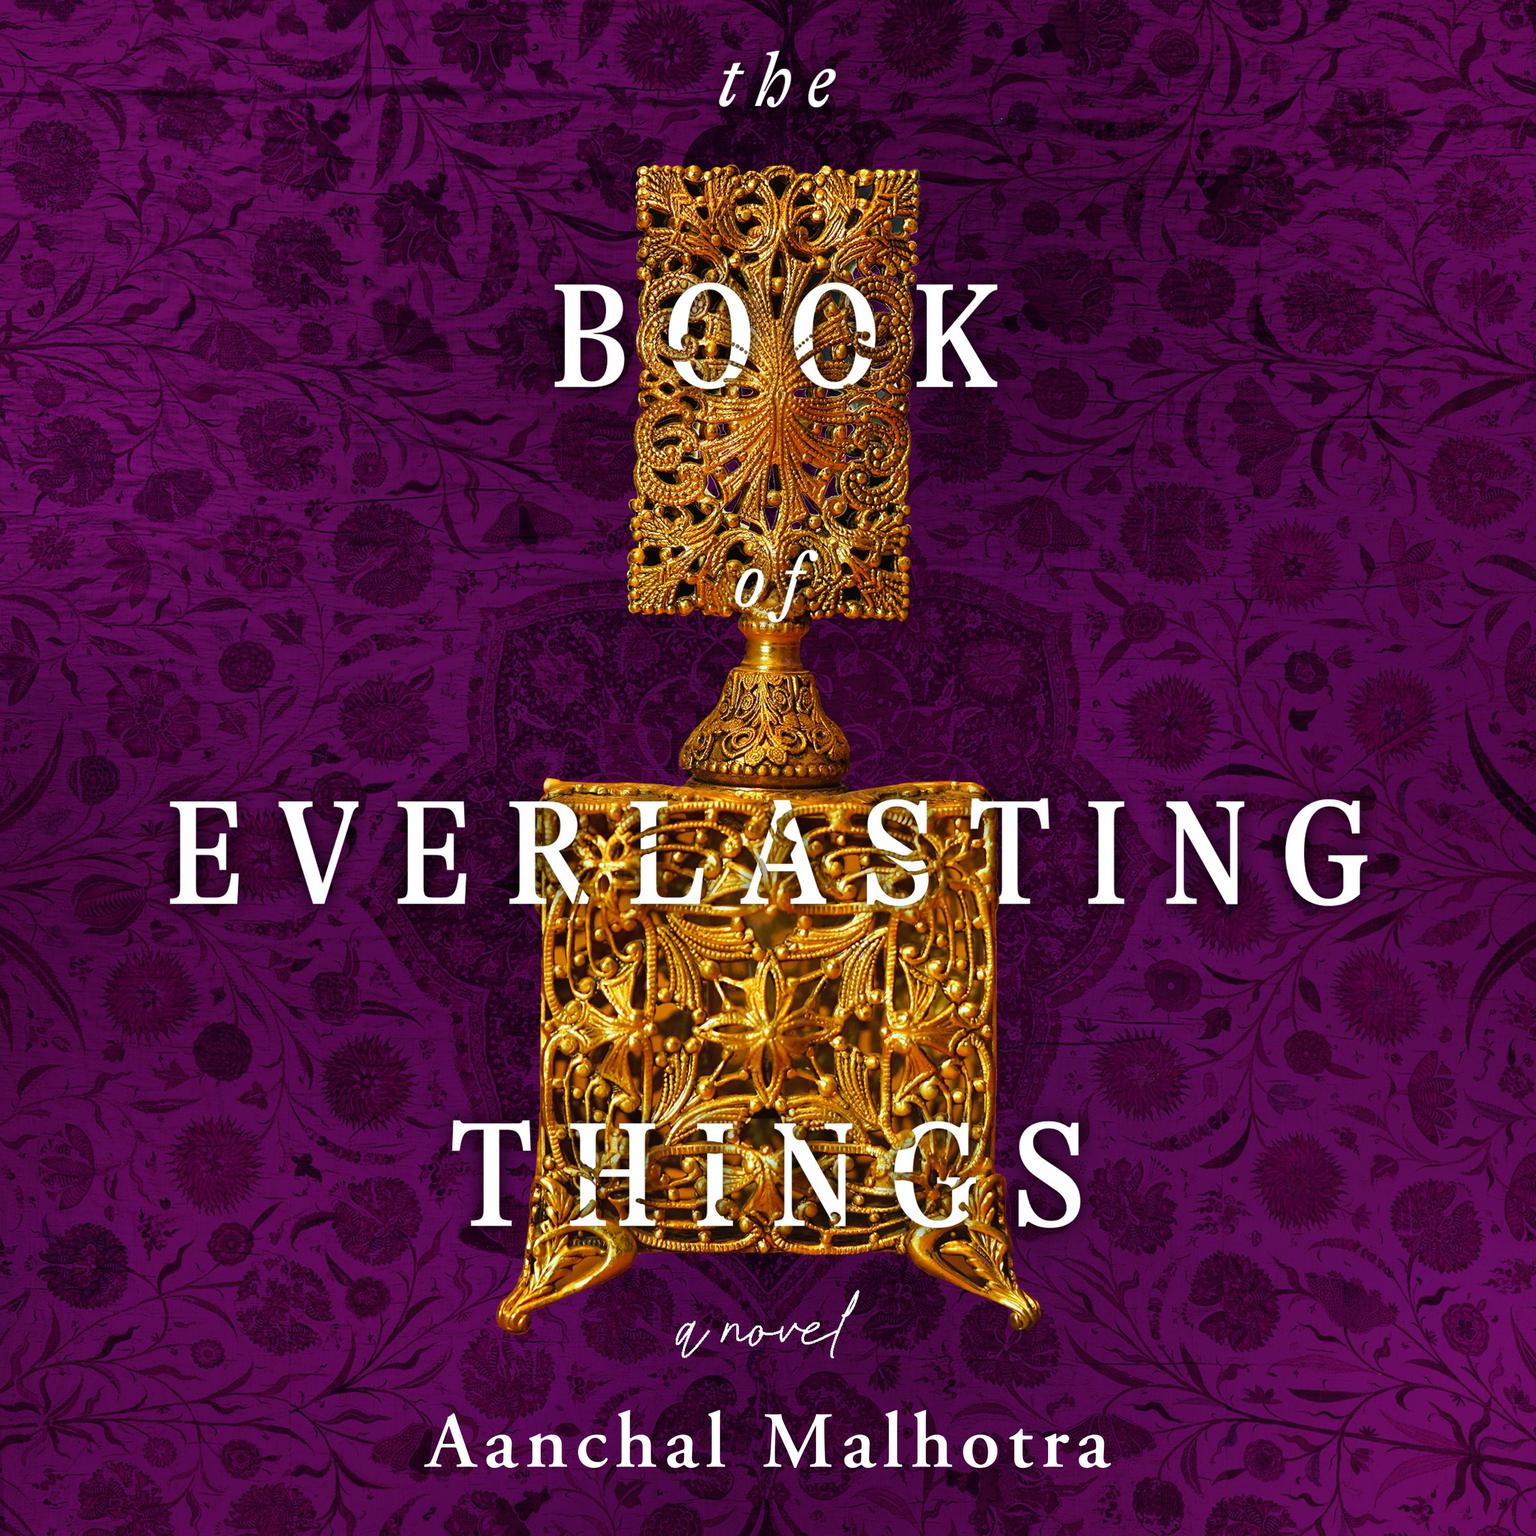 The Book of Everlasting Things: A Novel Audiobook, by Aanchal Malhotra